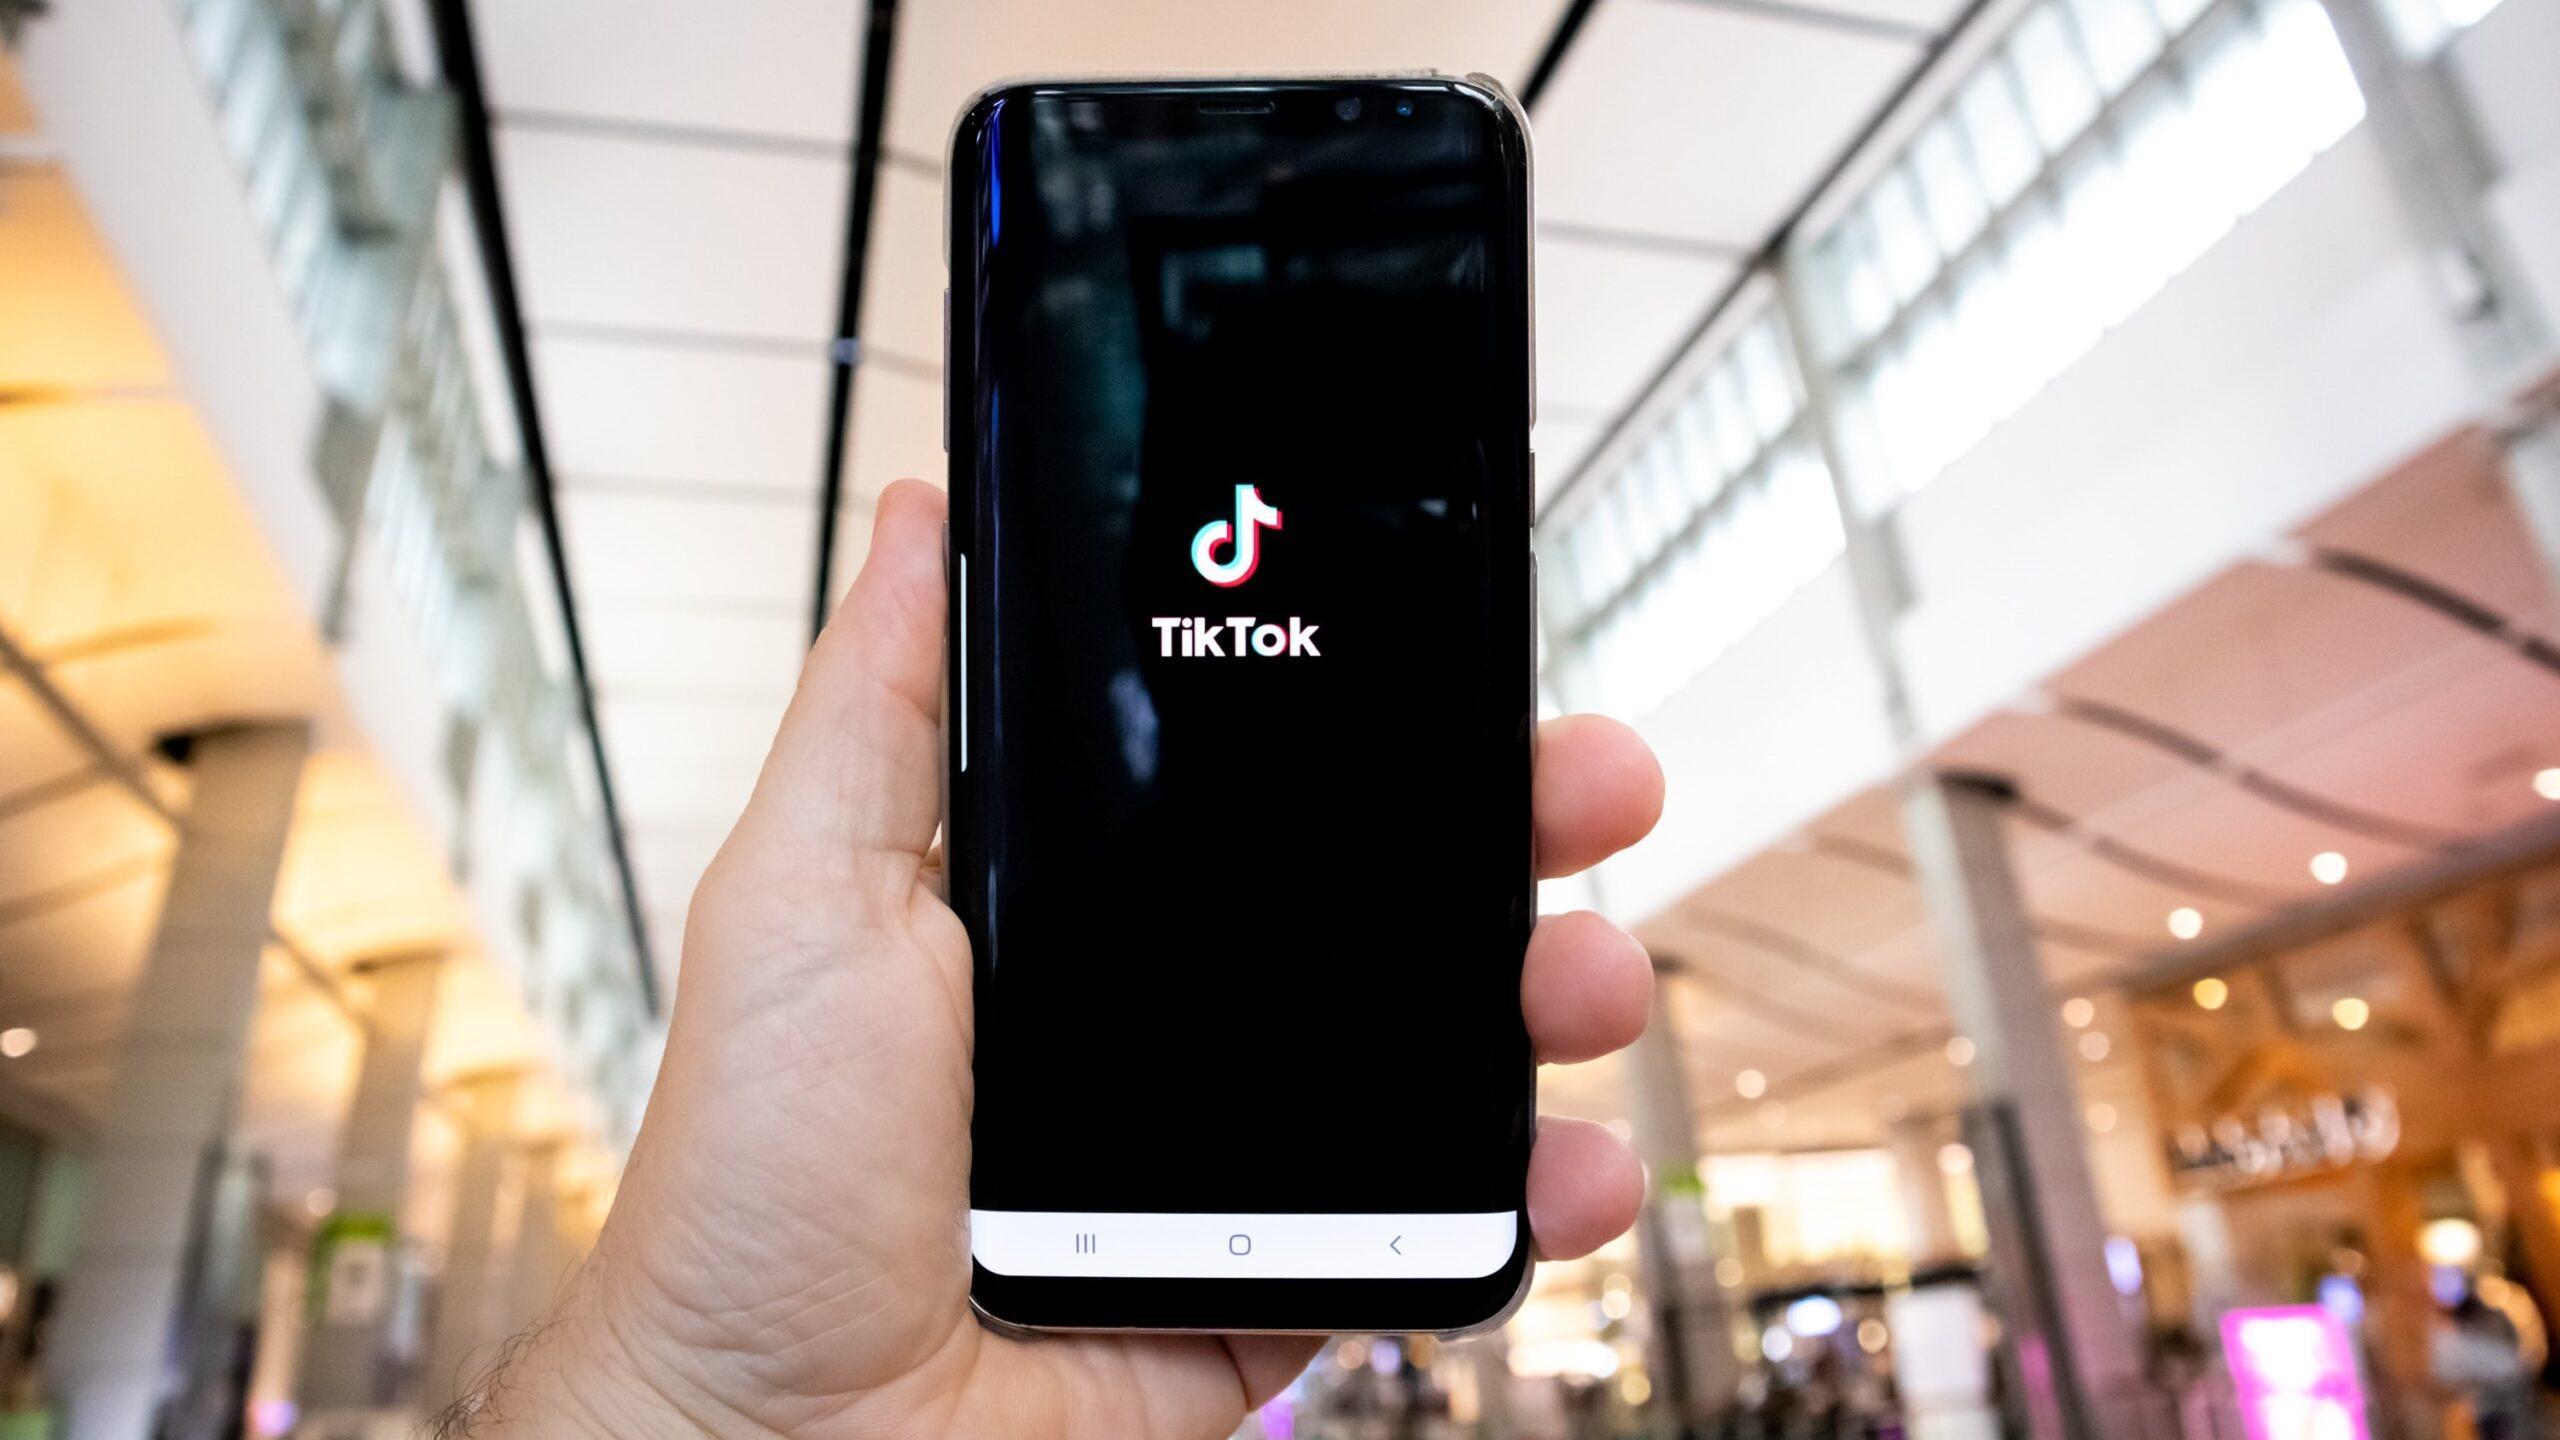 Close up of a hand holding a smartphone displaying the TikTok logo.